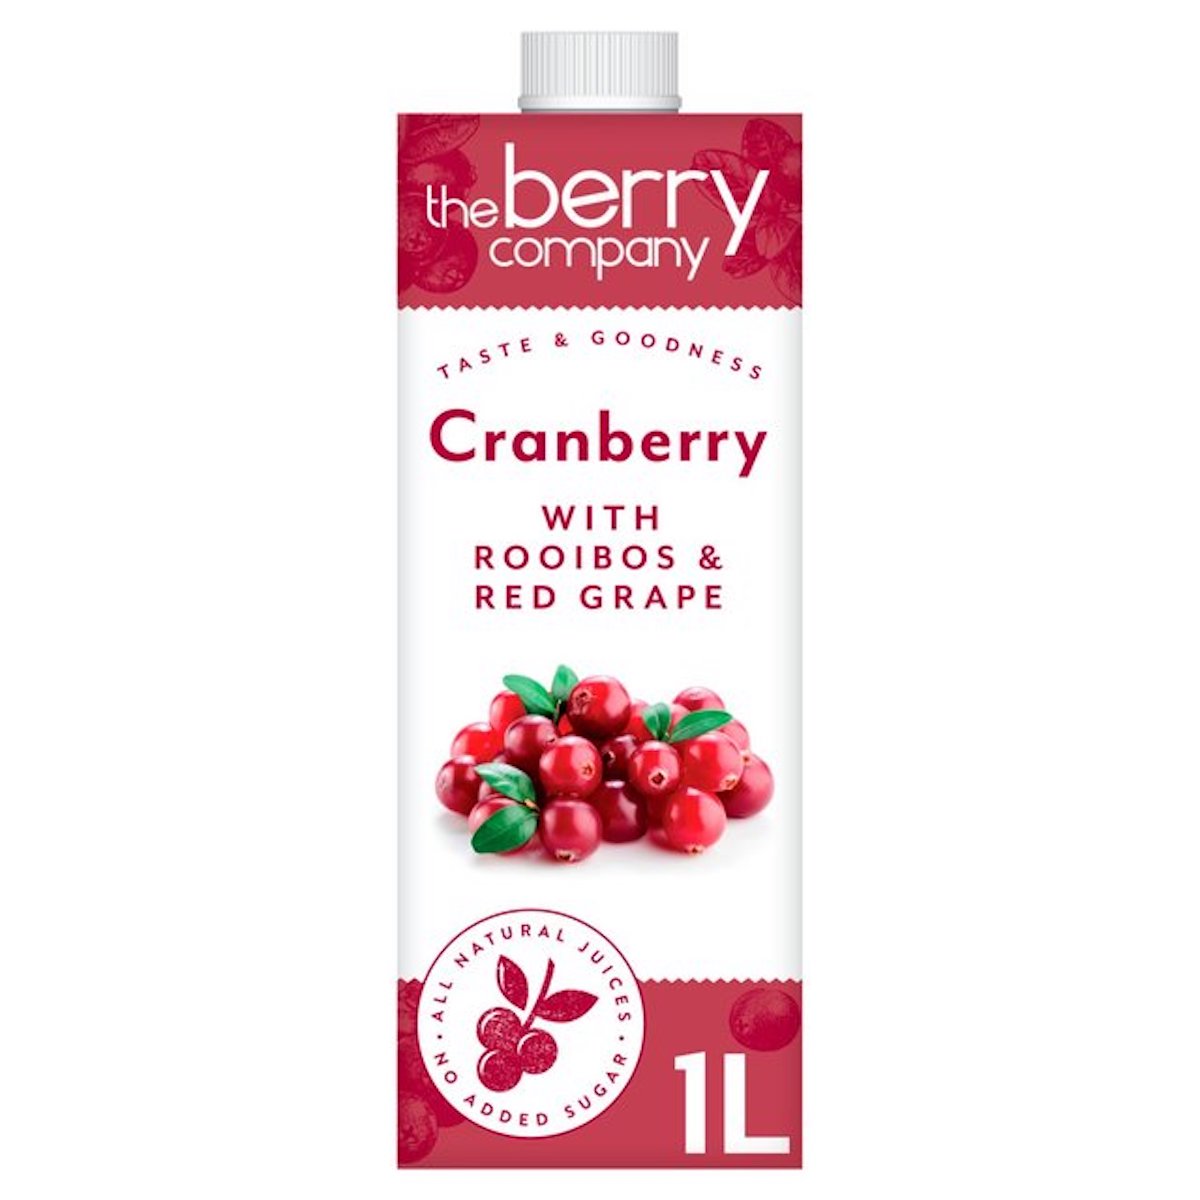 The Berry Co. Cranberry Juice With Rooibos & Red Grape 1L